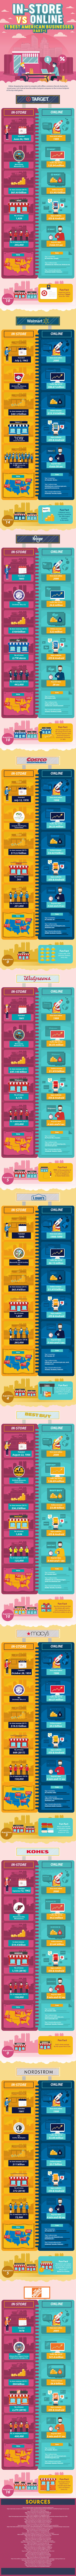 11 of the Biggest American Businesses: Online vs Offline [Infographic]